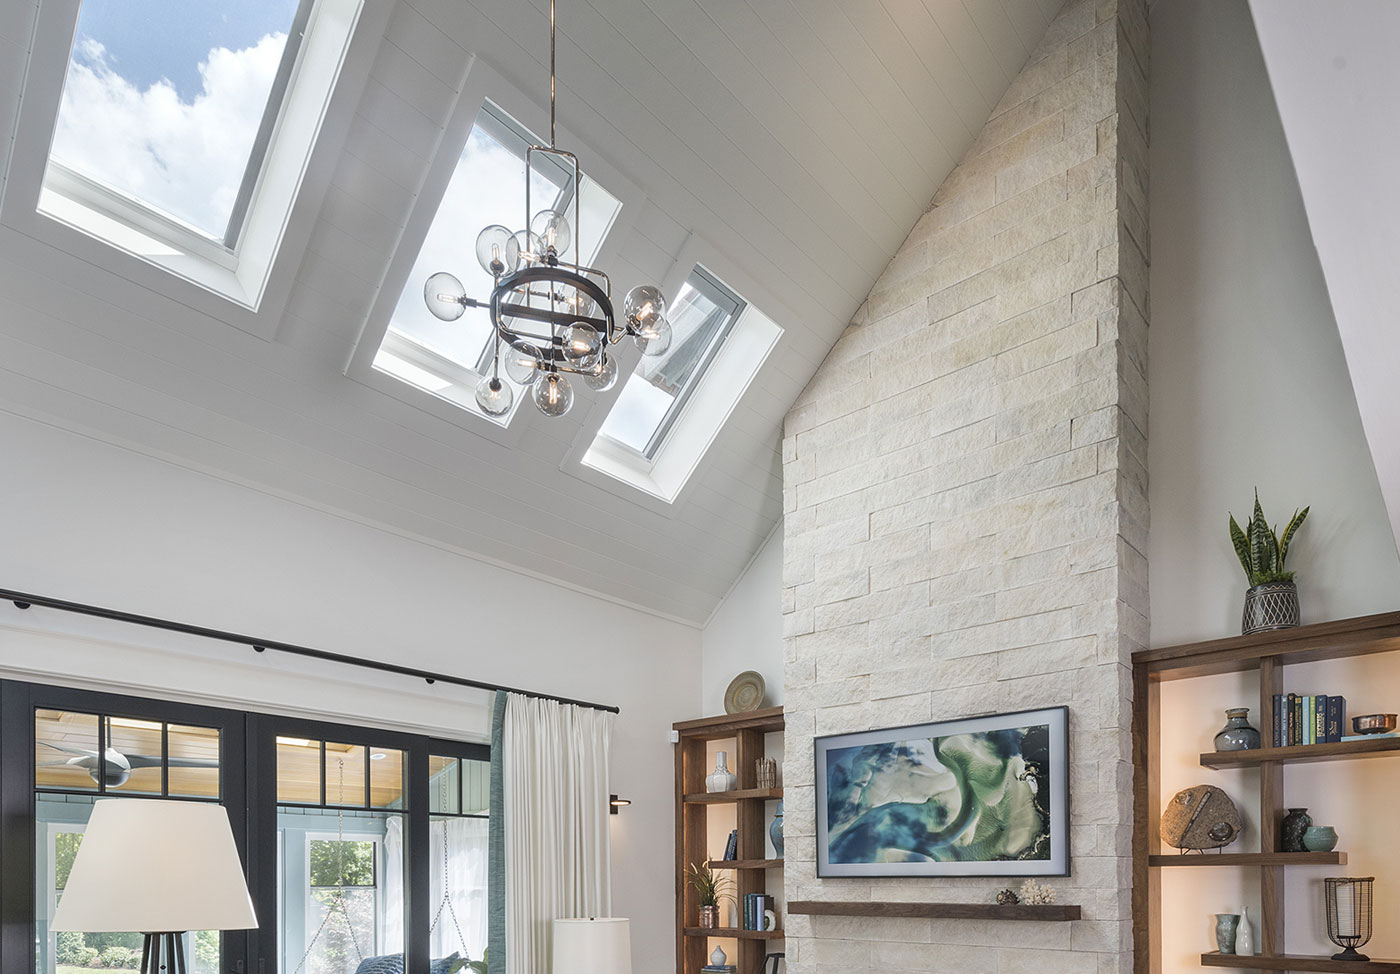 Elevated ceiling and skylights